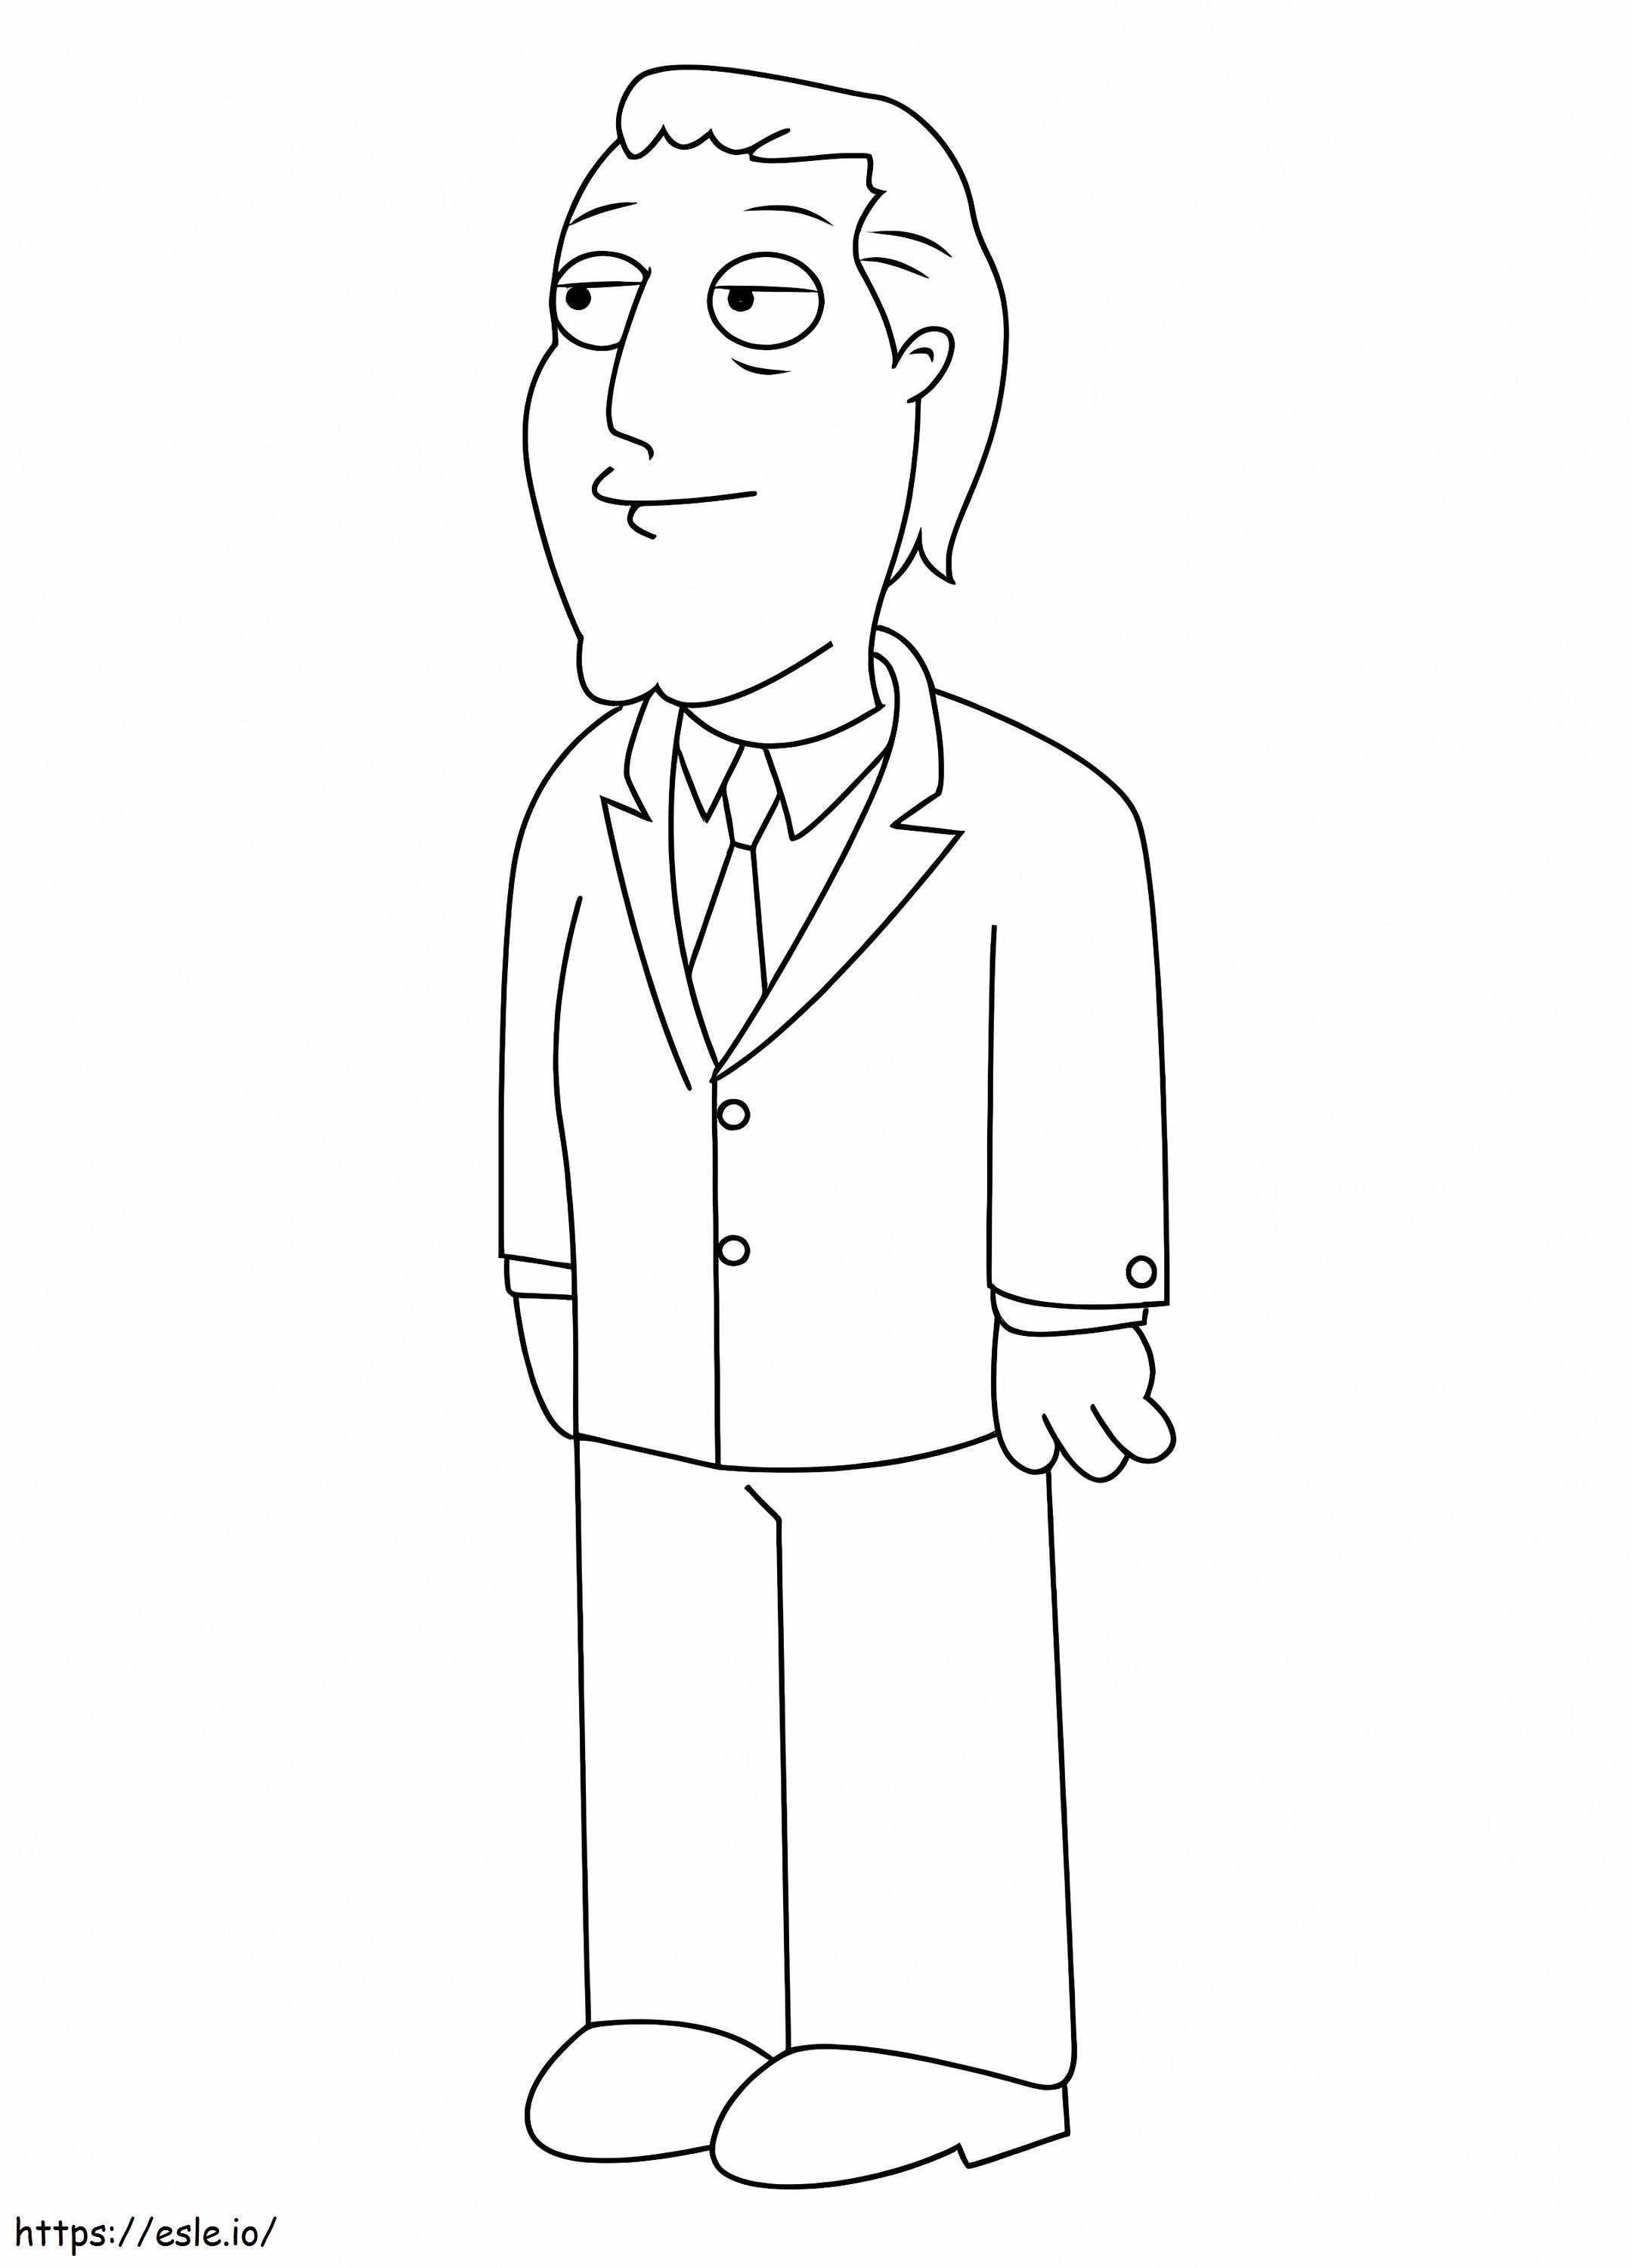 Mayor Adam West Family Guy coloring page